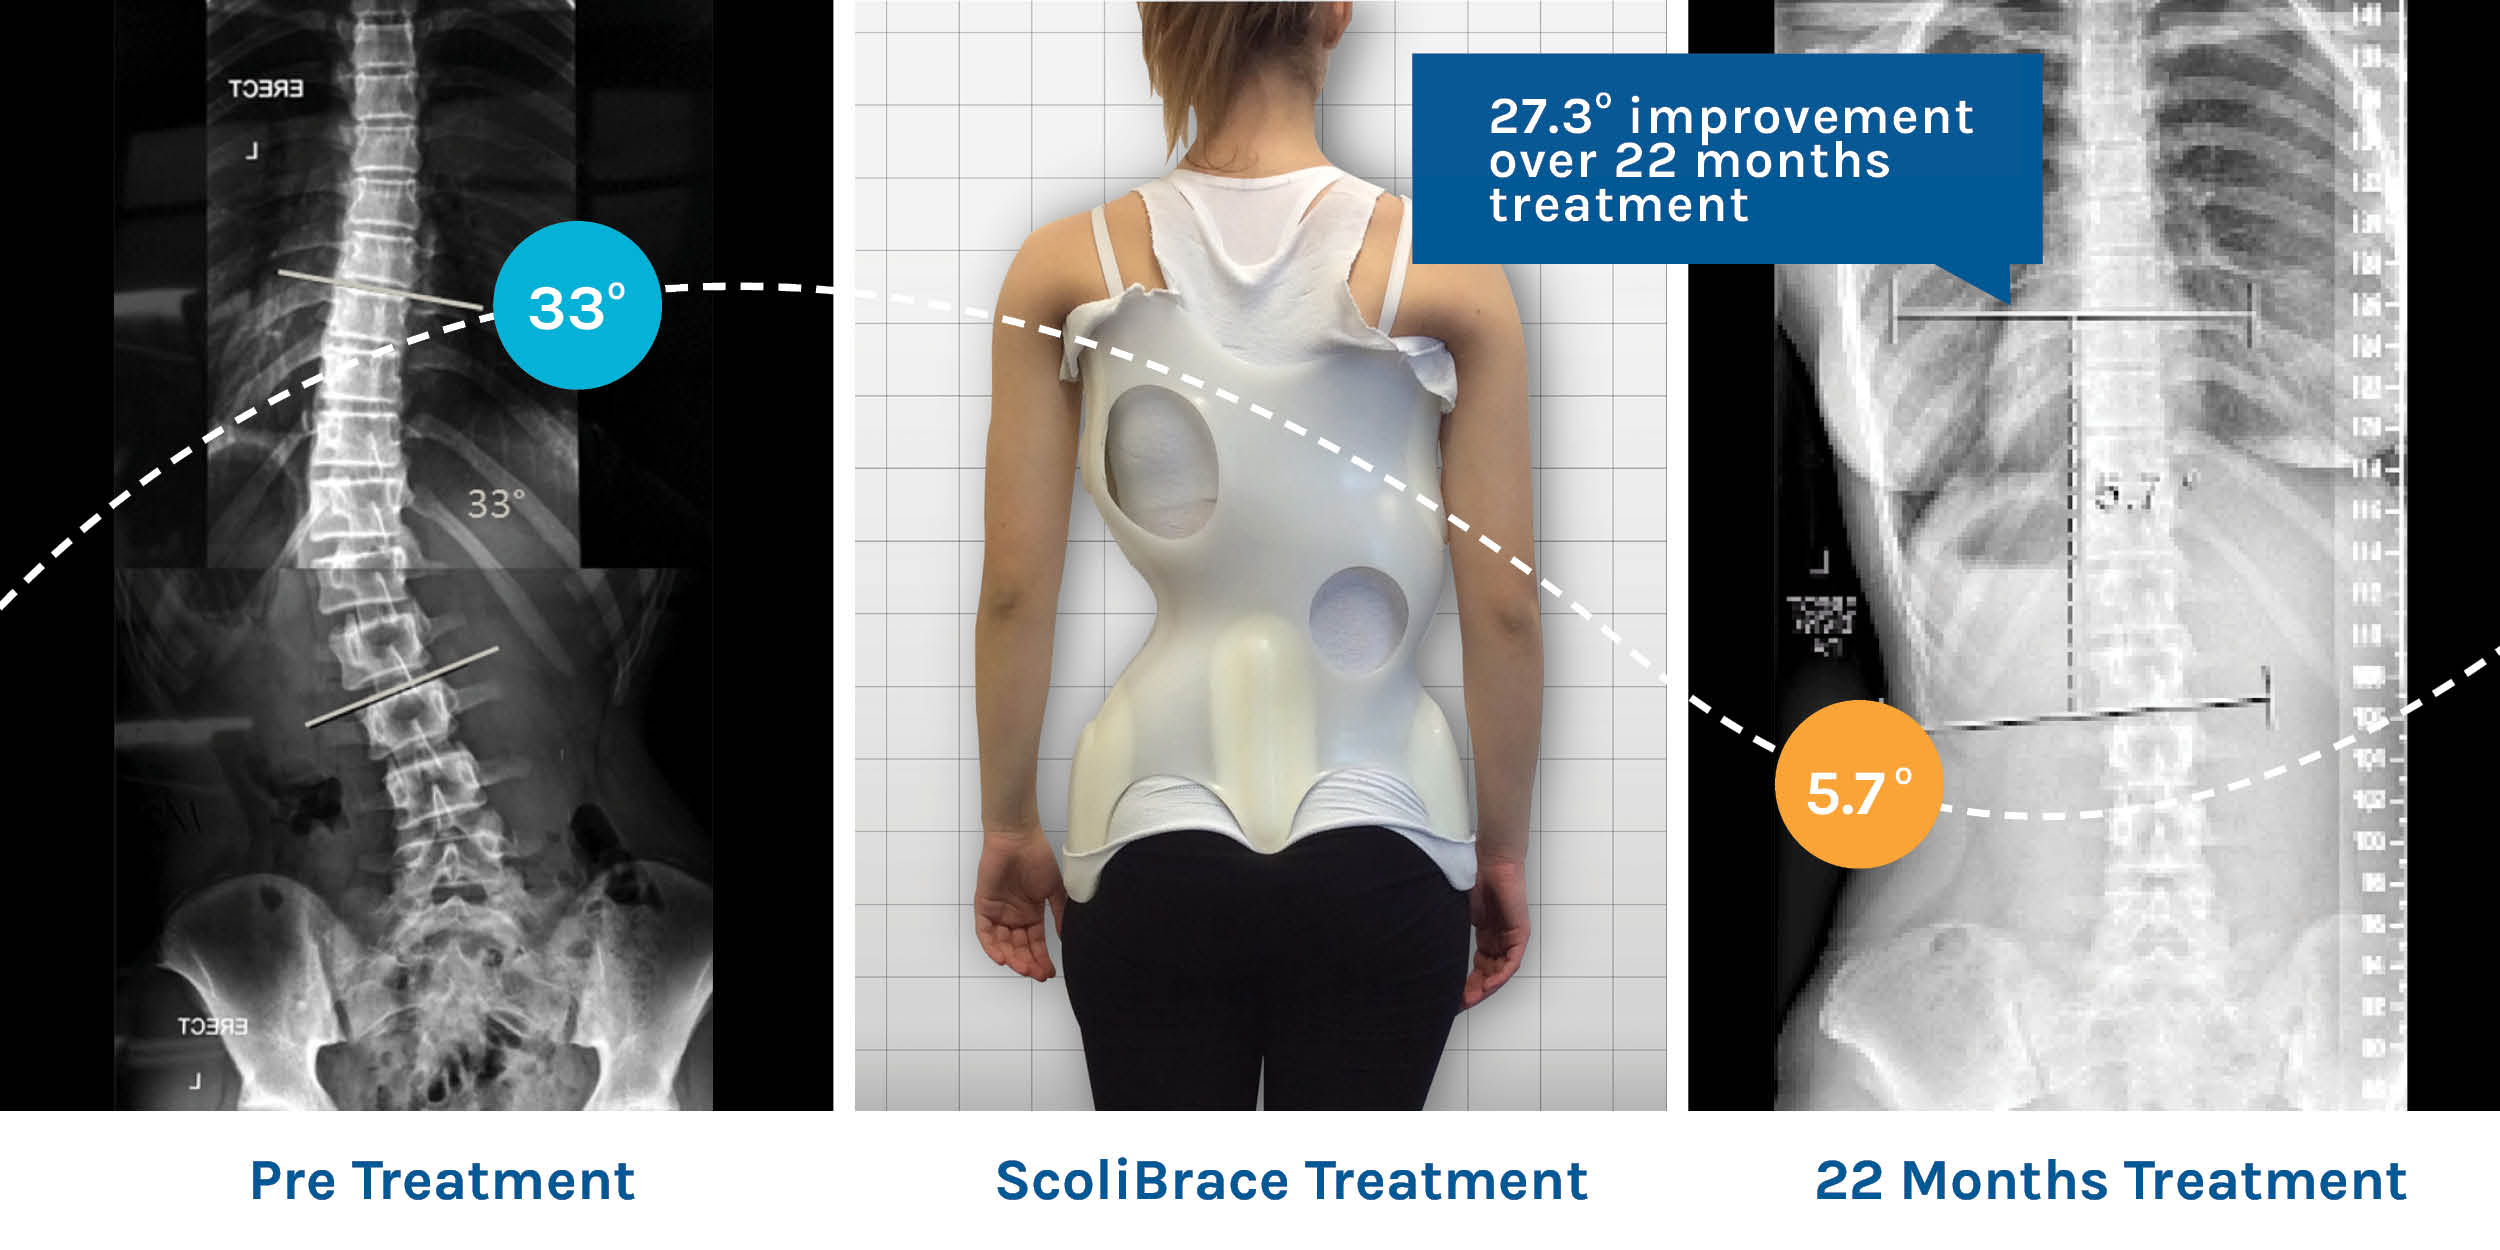 Monitoring Scoliosis Brace Wear-Time Can Improve Results